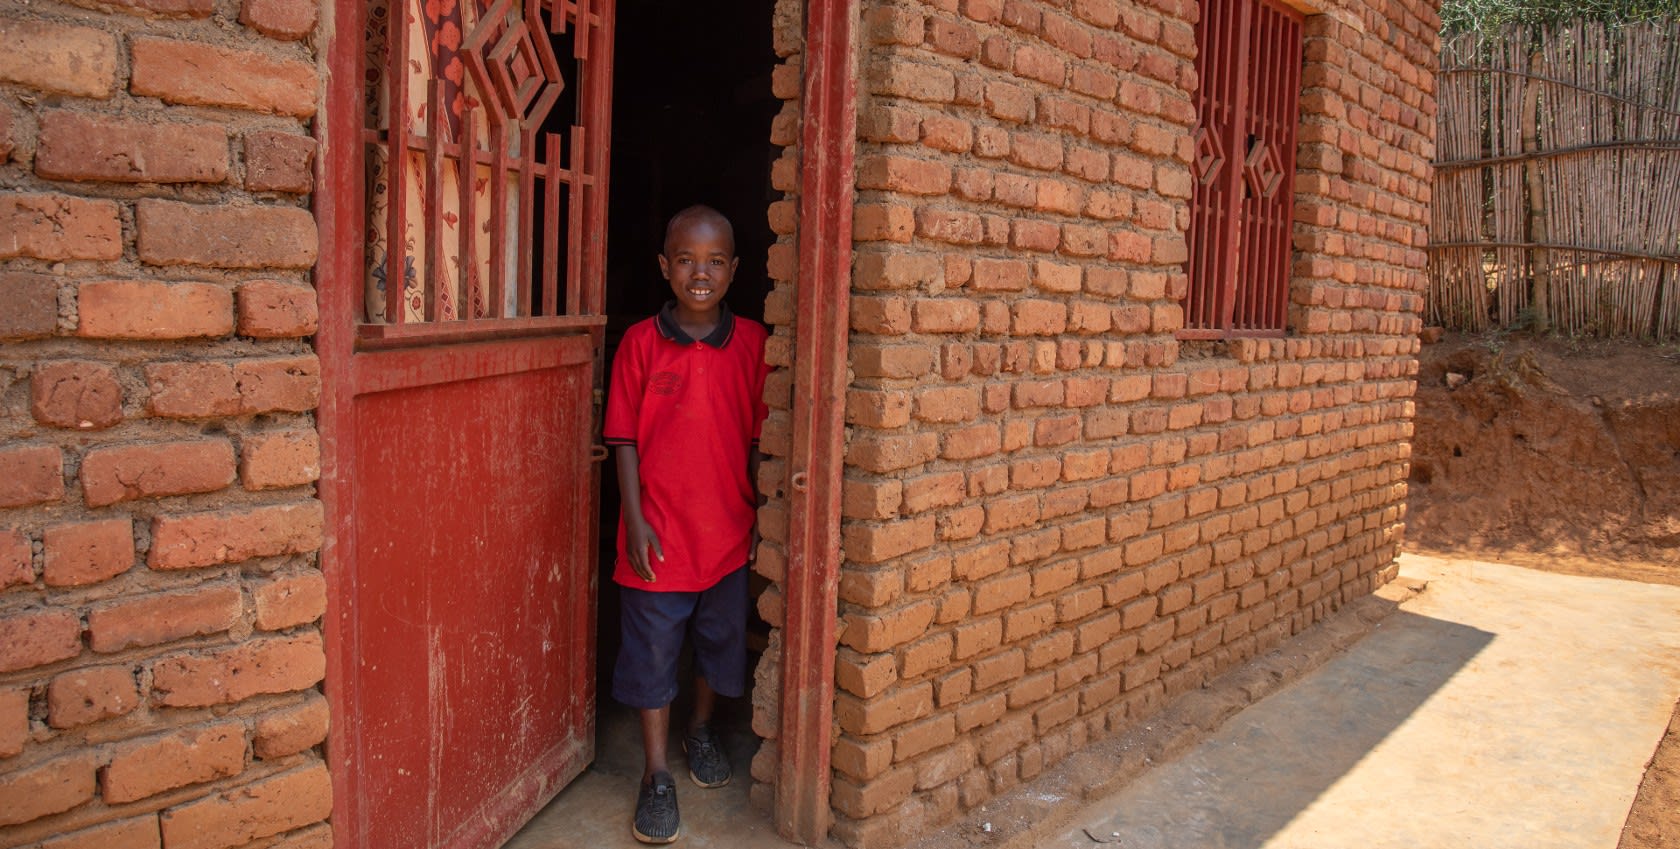 A boy wearing red shirt, standing by the door of a brick house.